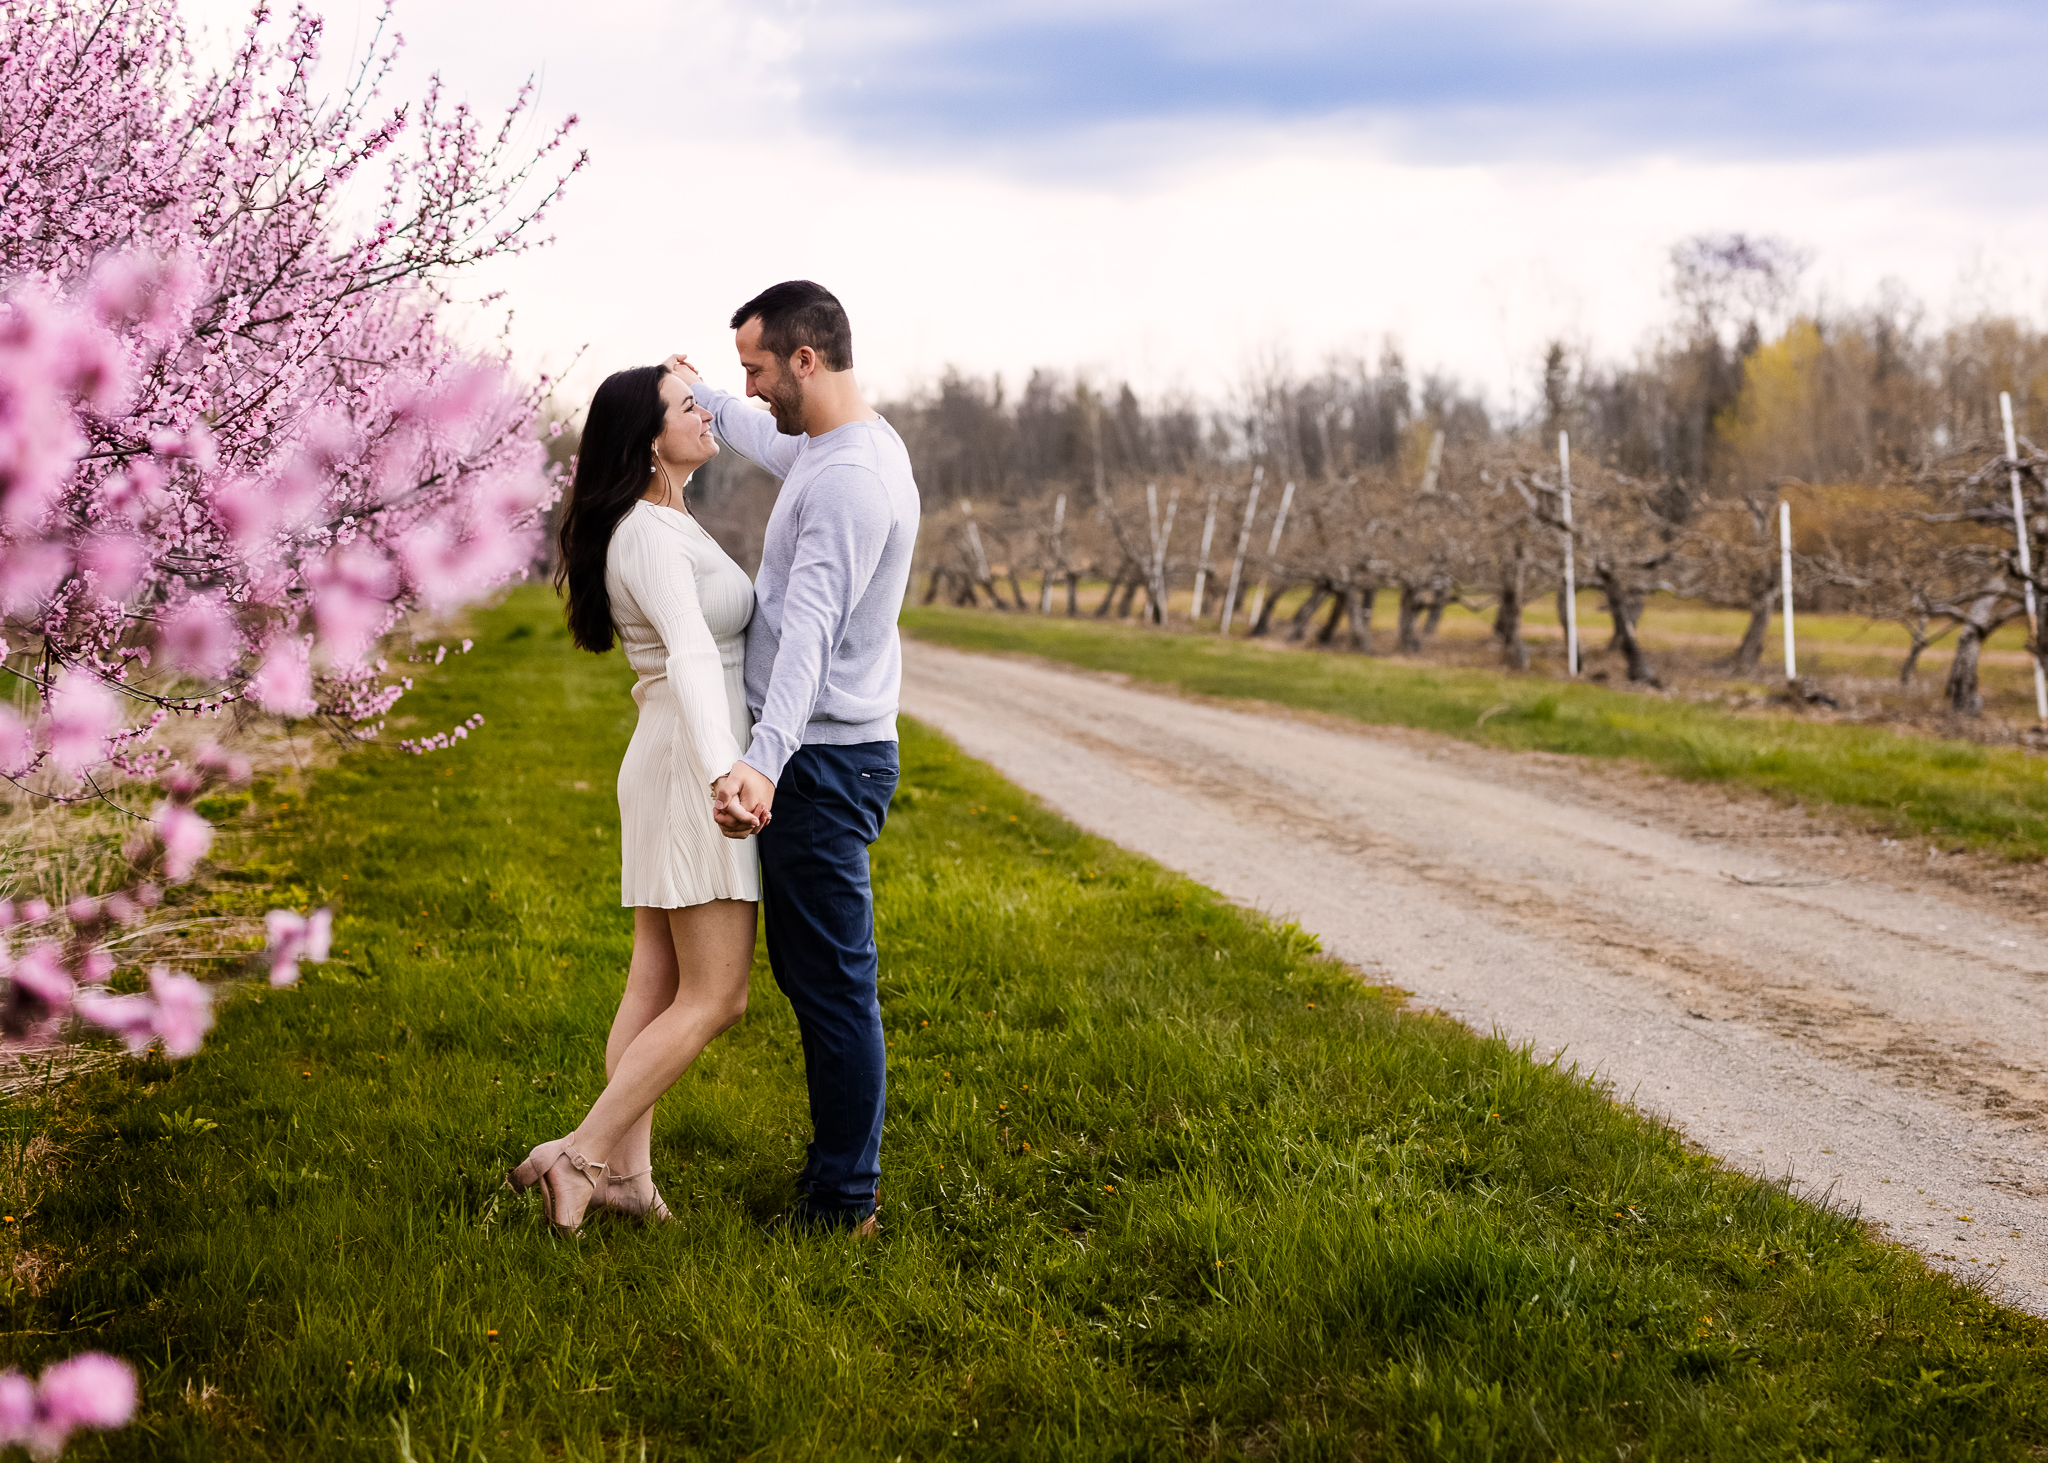 Couple embracing in front of tree with pink blossoms at Alysons Orchard during New Hampshire Cloudy Day Photo Sessions